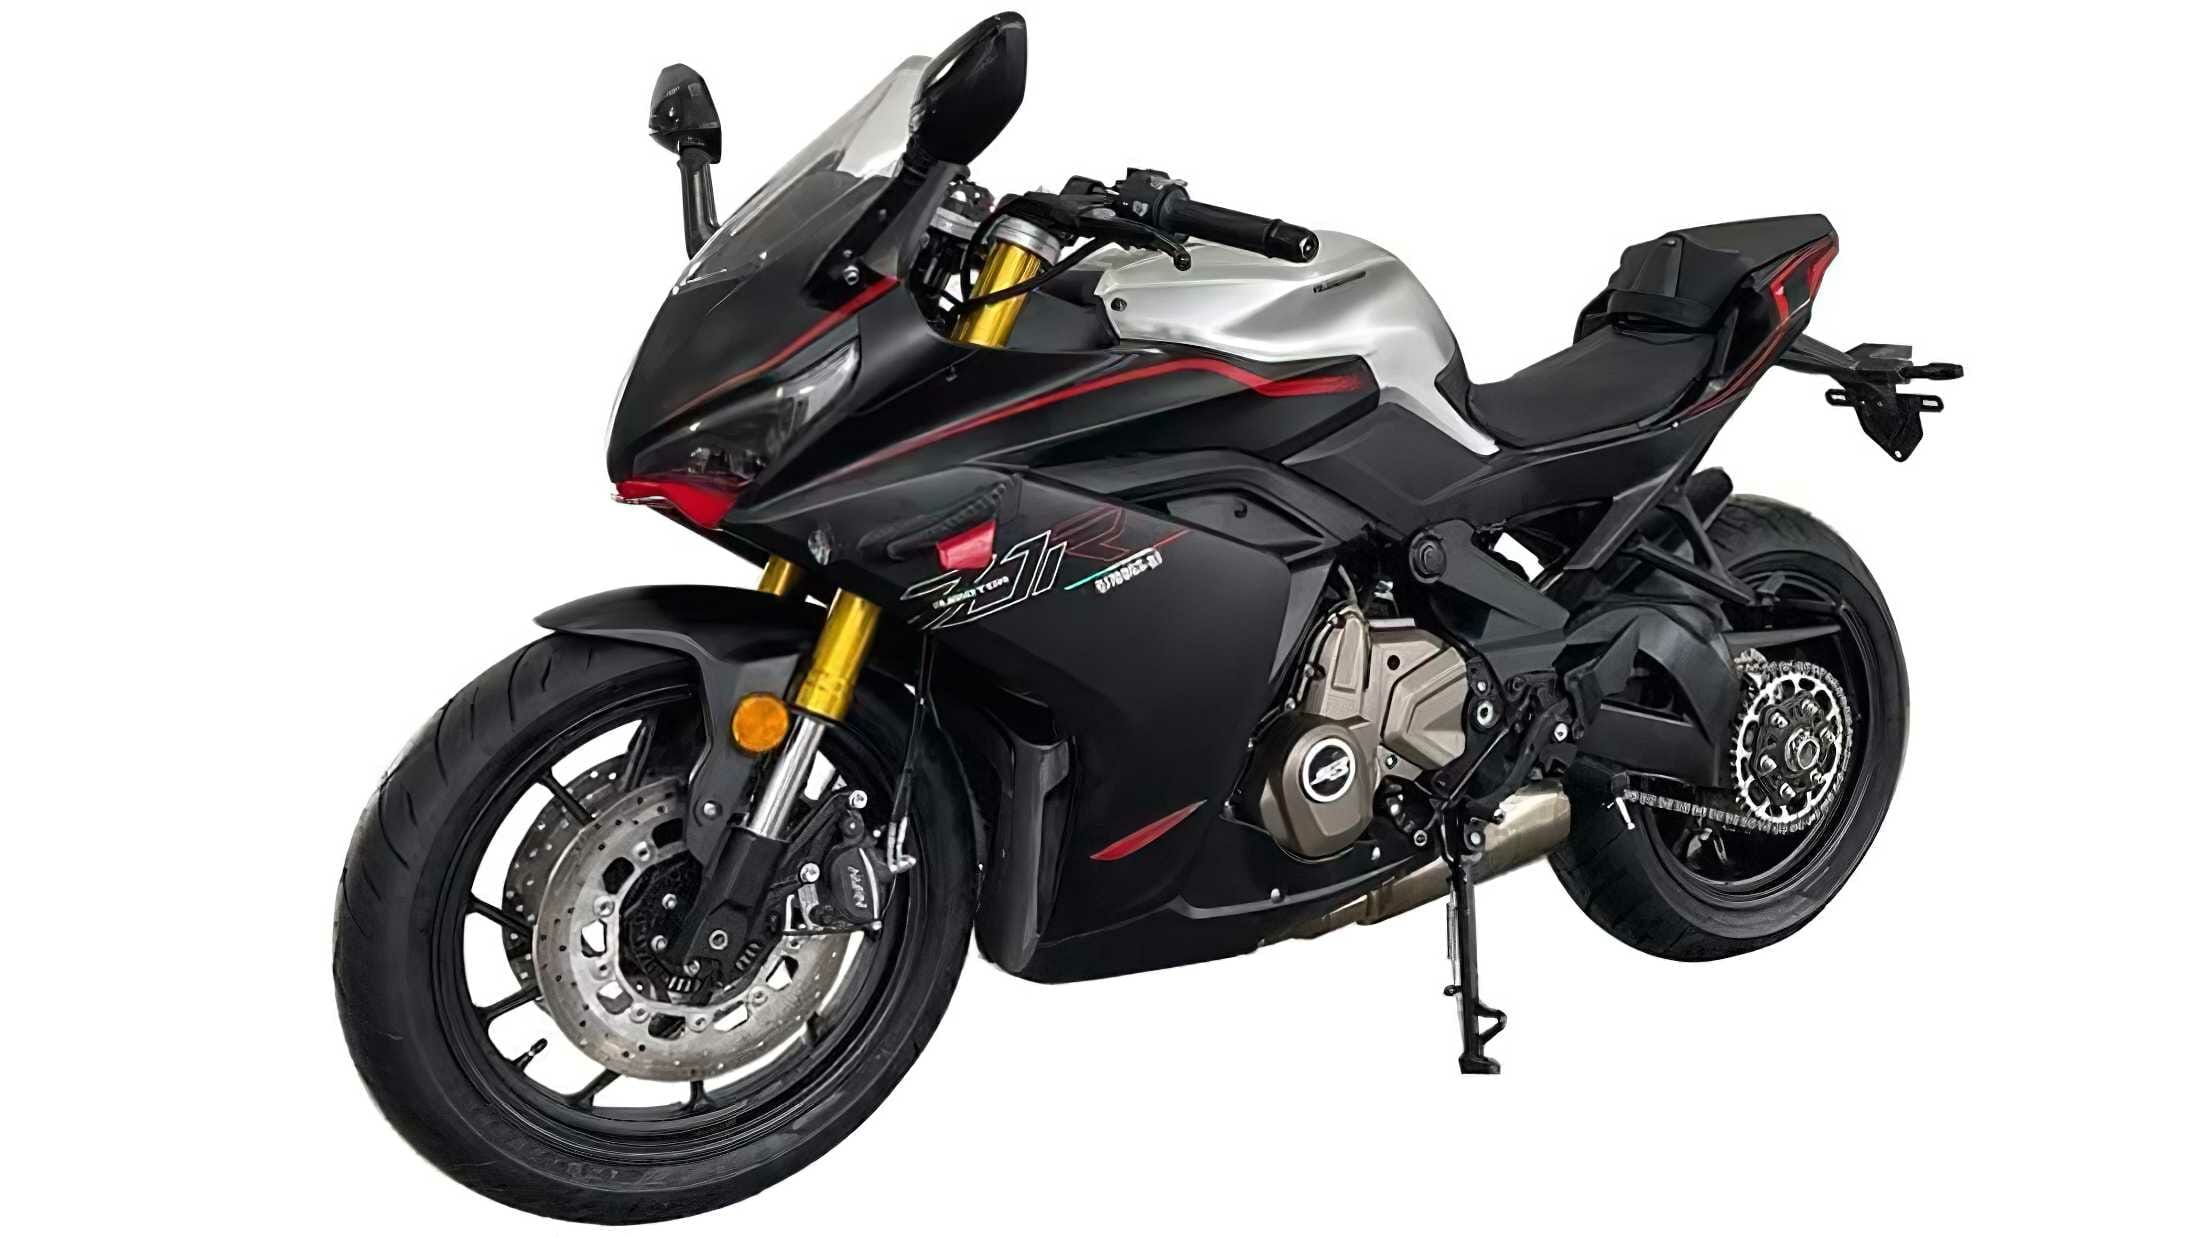 700cc sportbike and naked bike from QJ Motor
- also in the MOTORCYCLES.NEWS APP